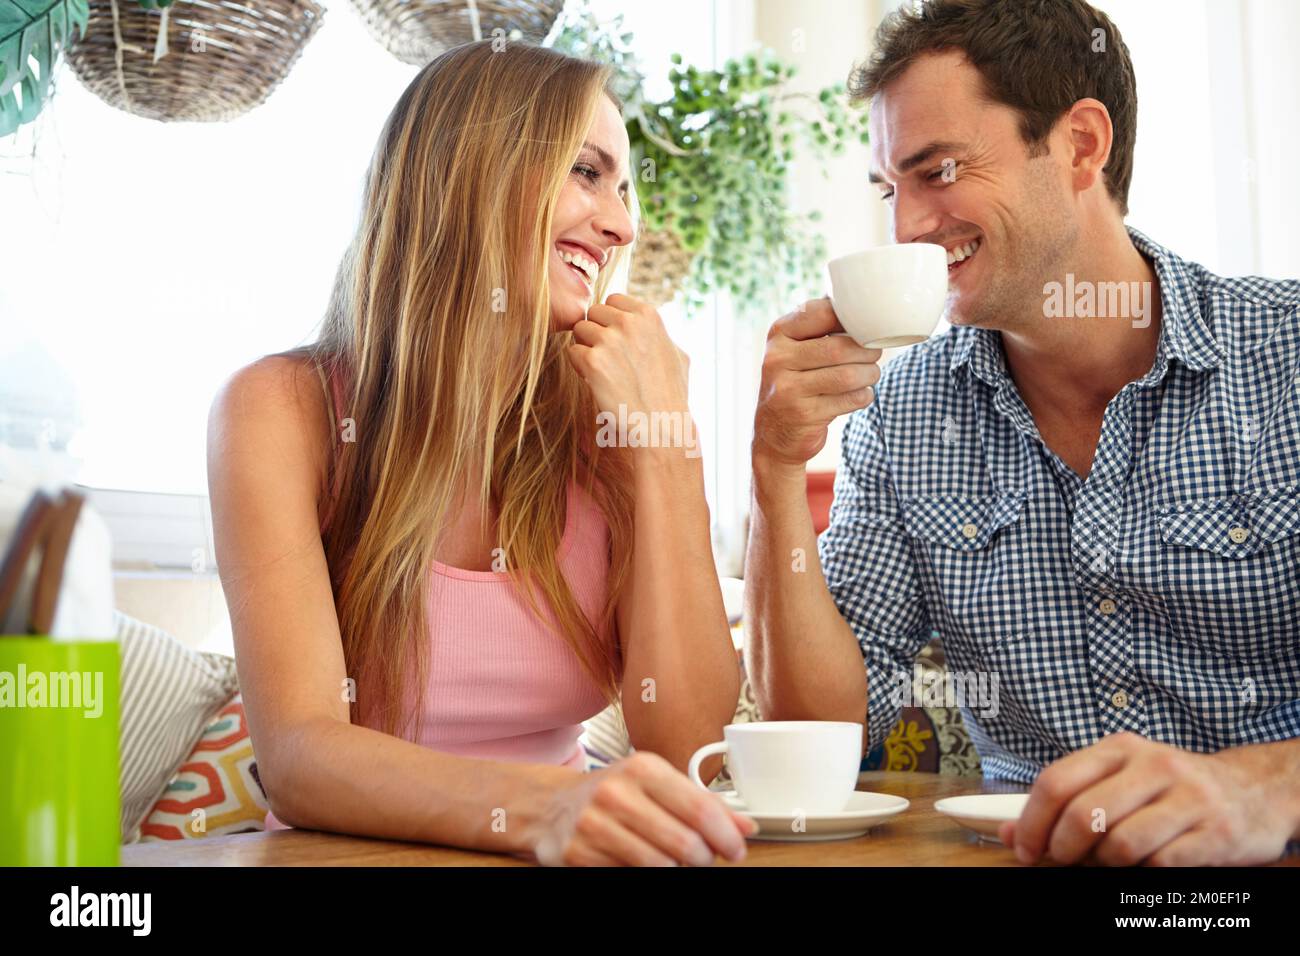 Coffee shop conversation. An attractive young couple enjoying a cup of coffee in restaurant. Stock Photo